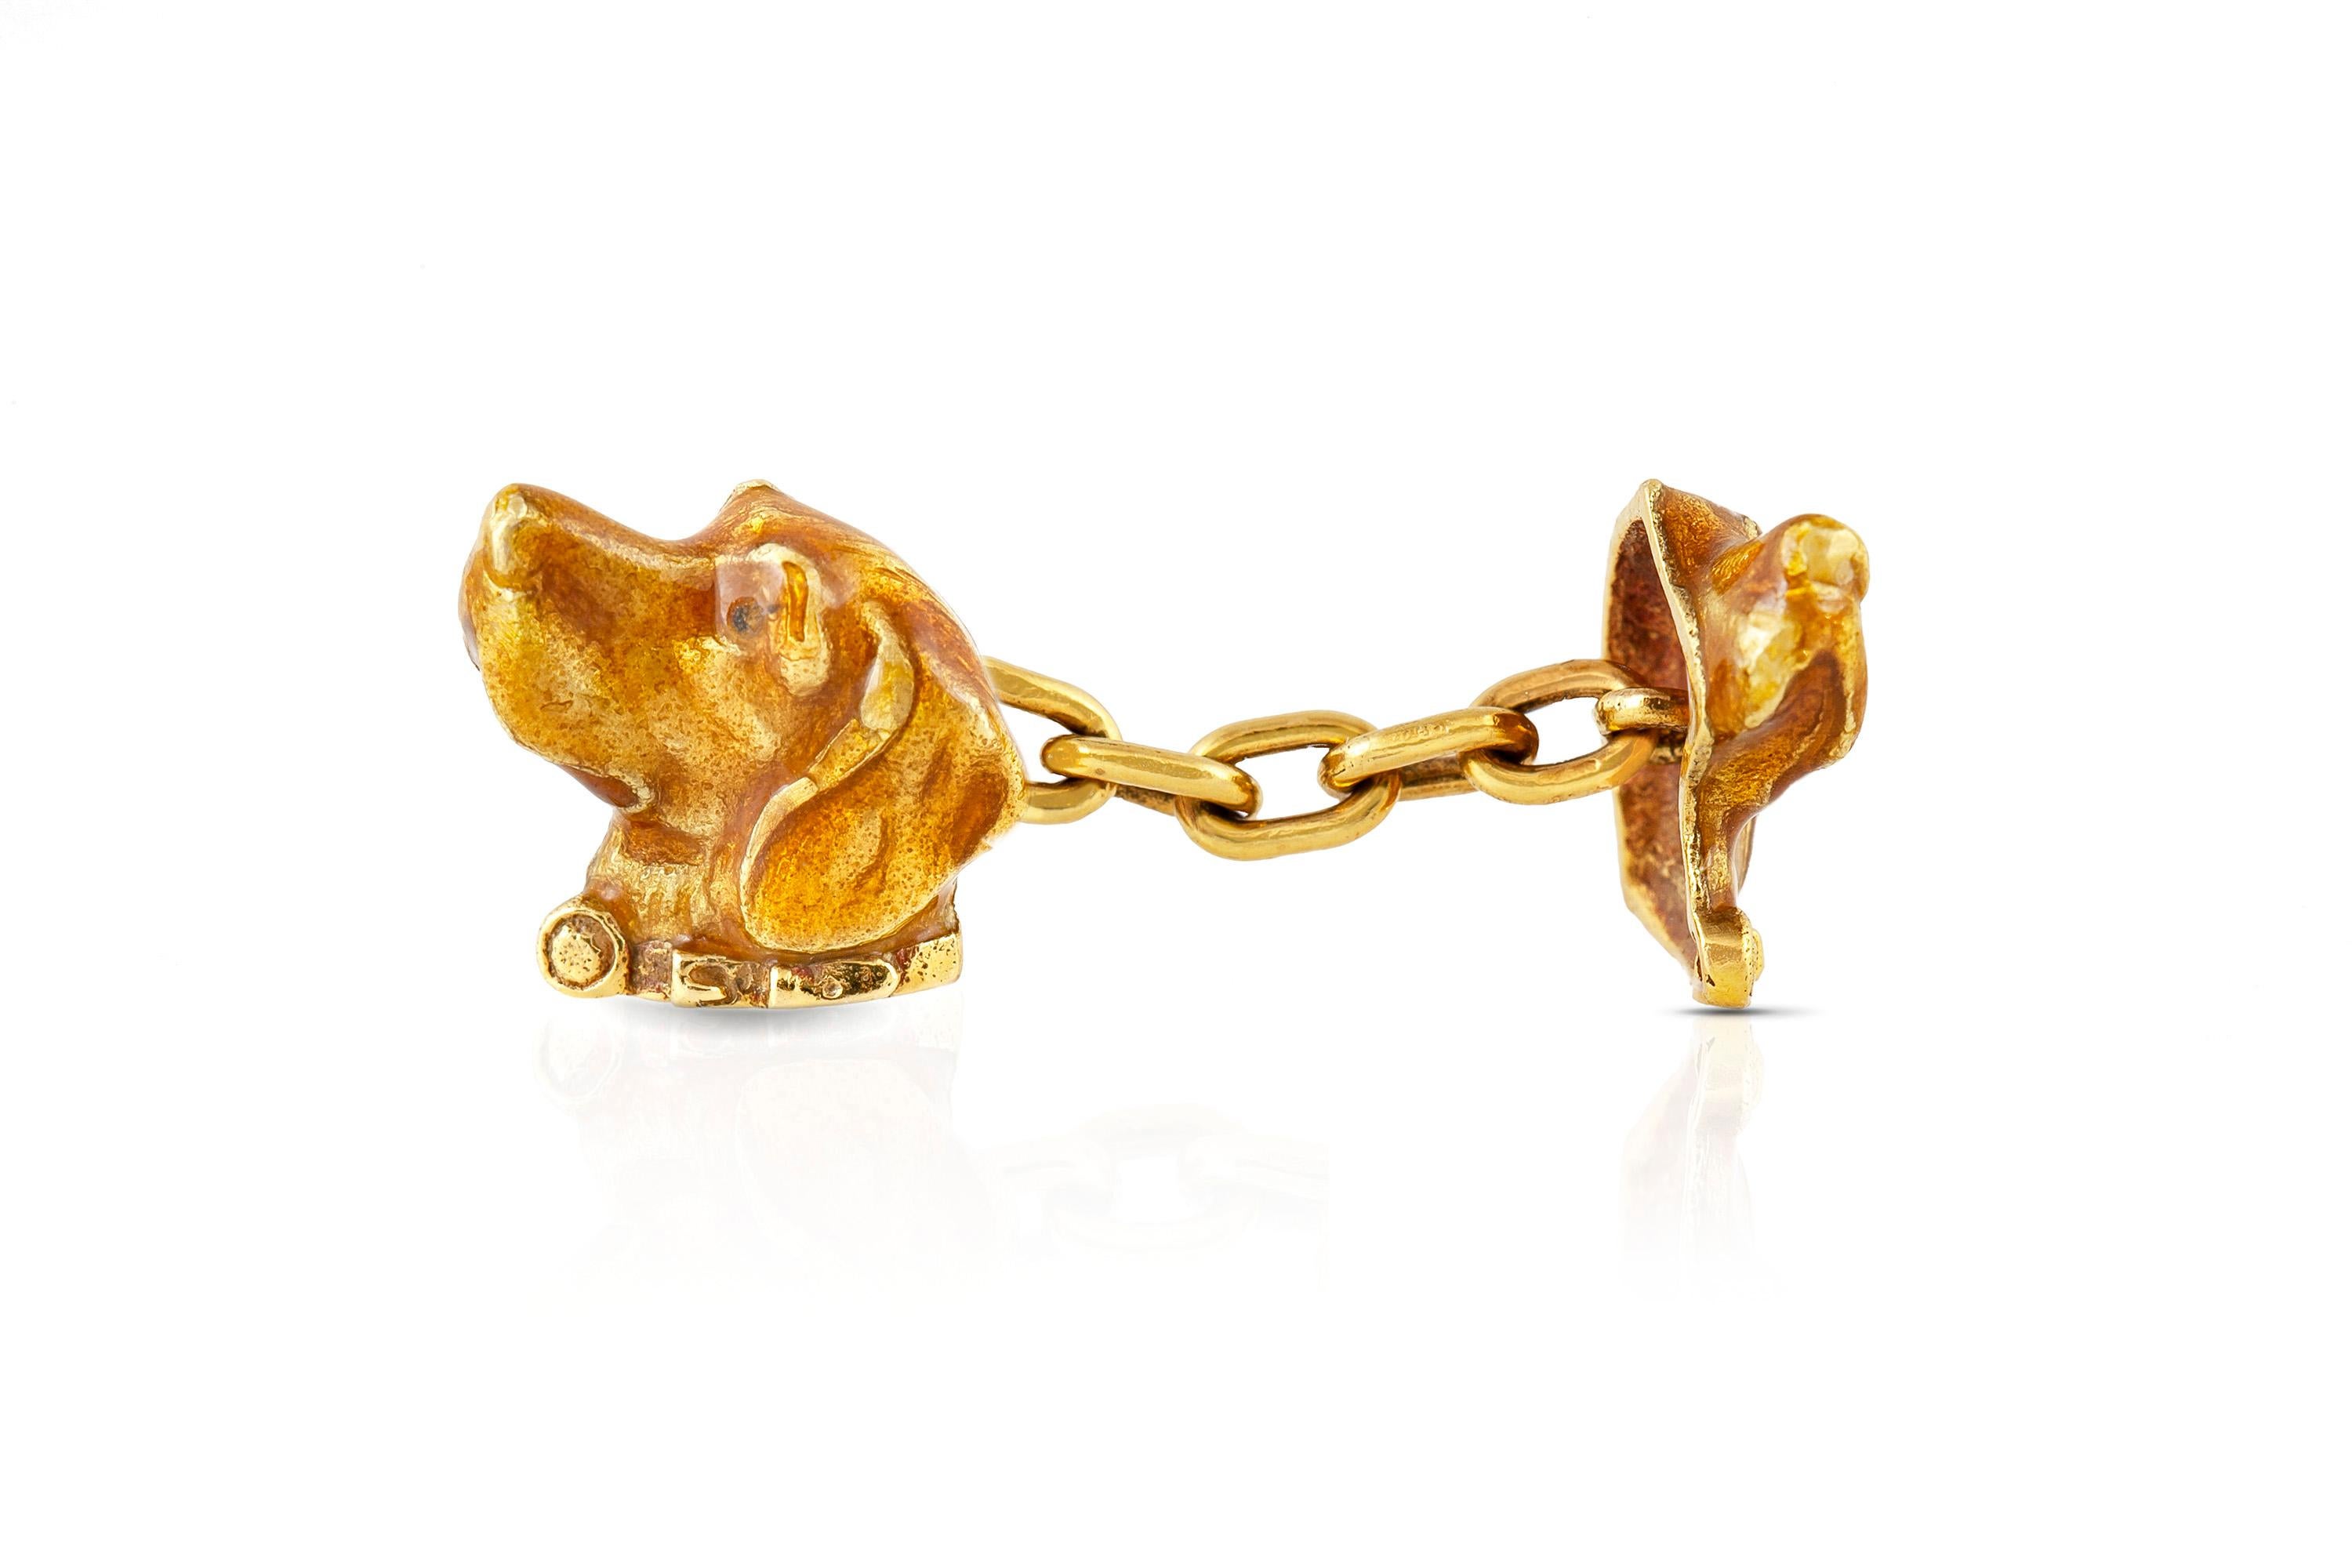 Antique art nouveau dog head cufflinks, finely crafted in 18k yellow gold with brown enamel.
Circa 1890-1910.